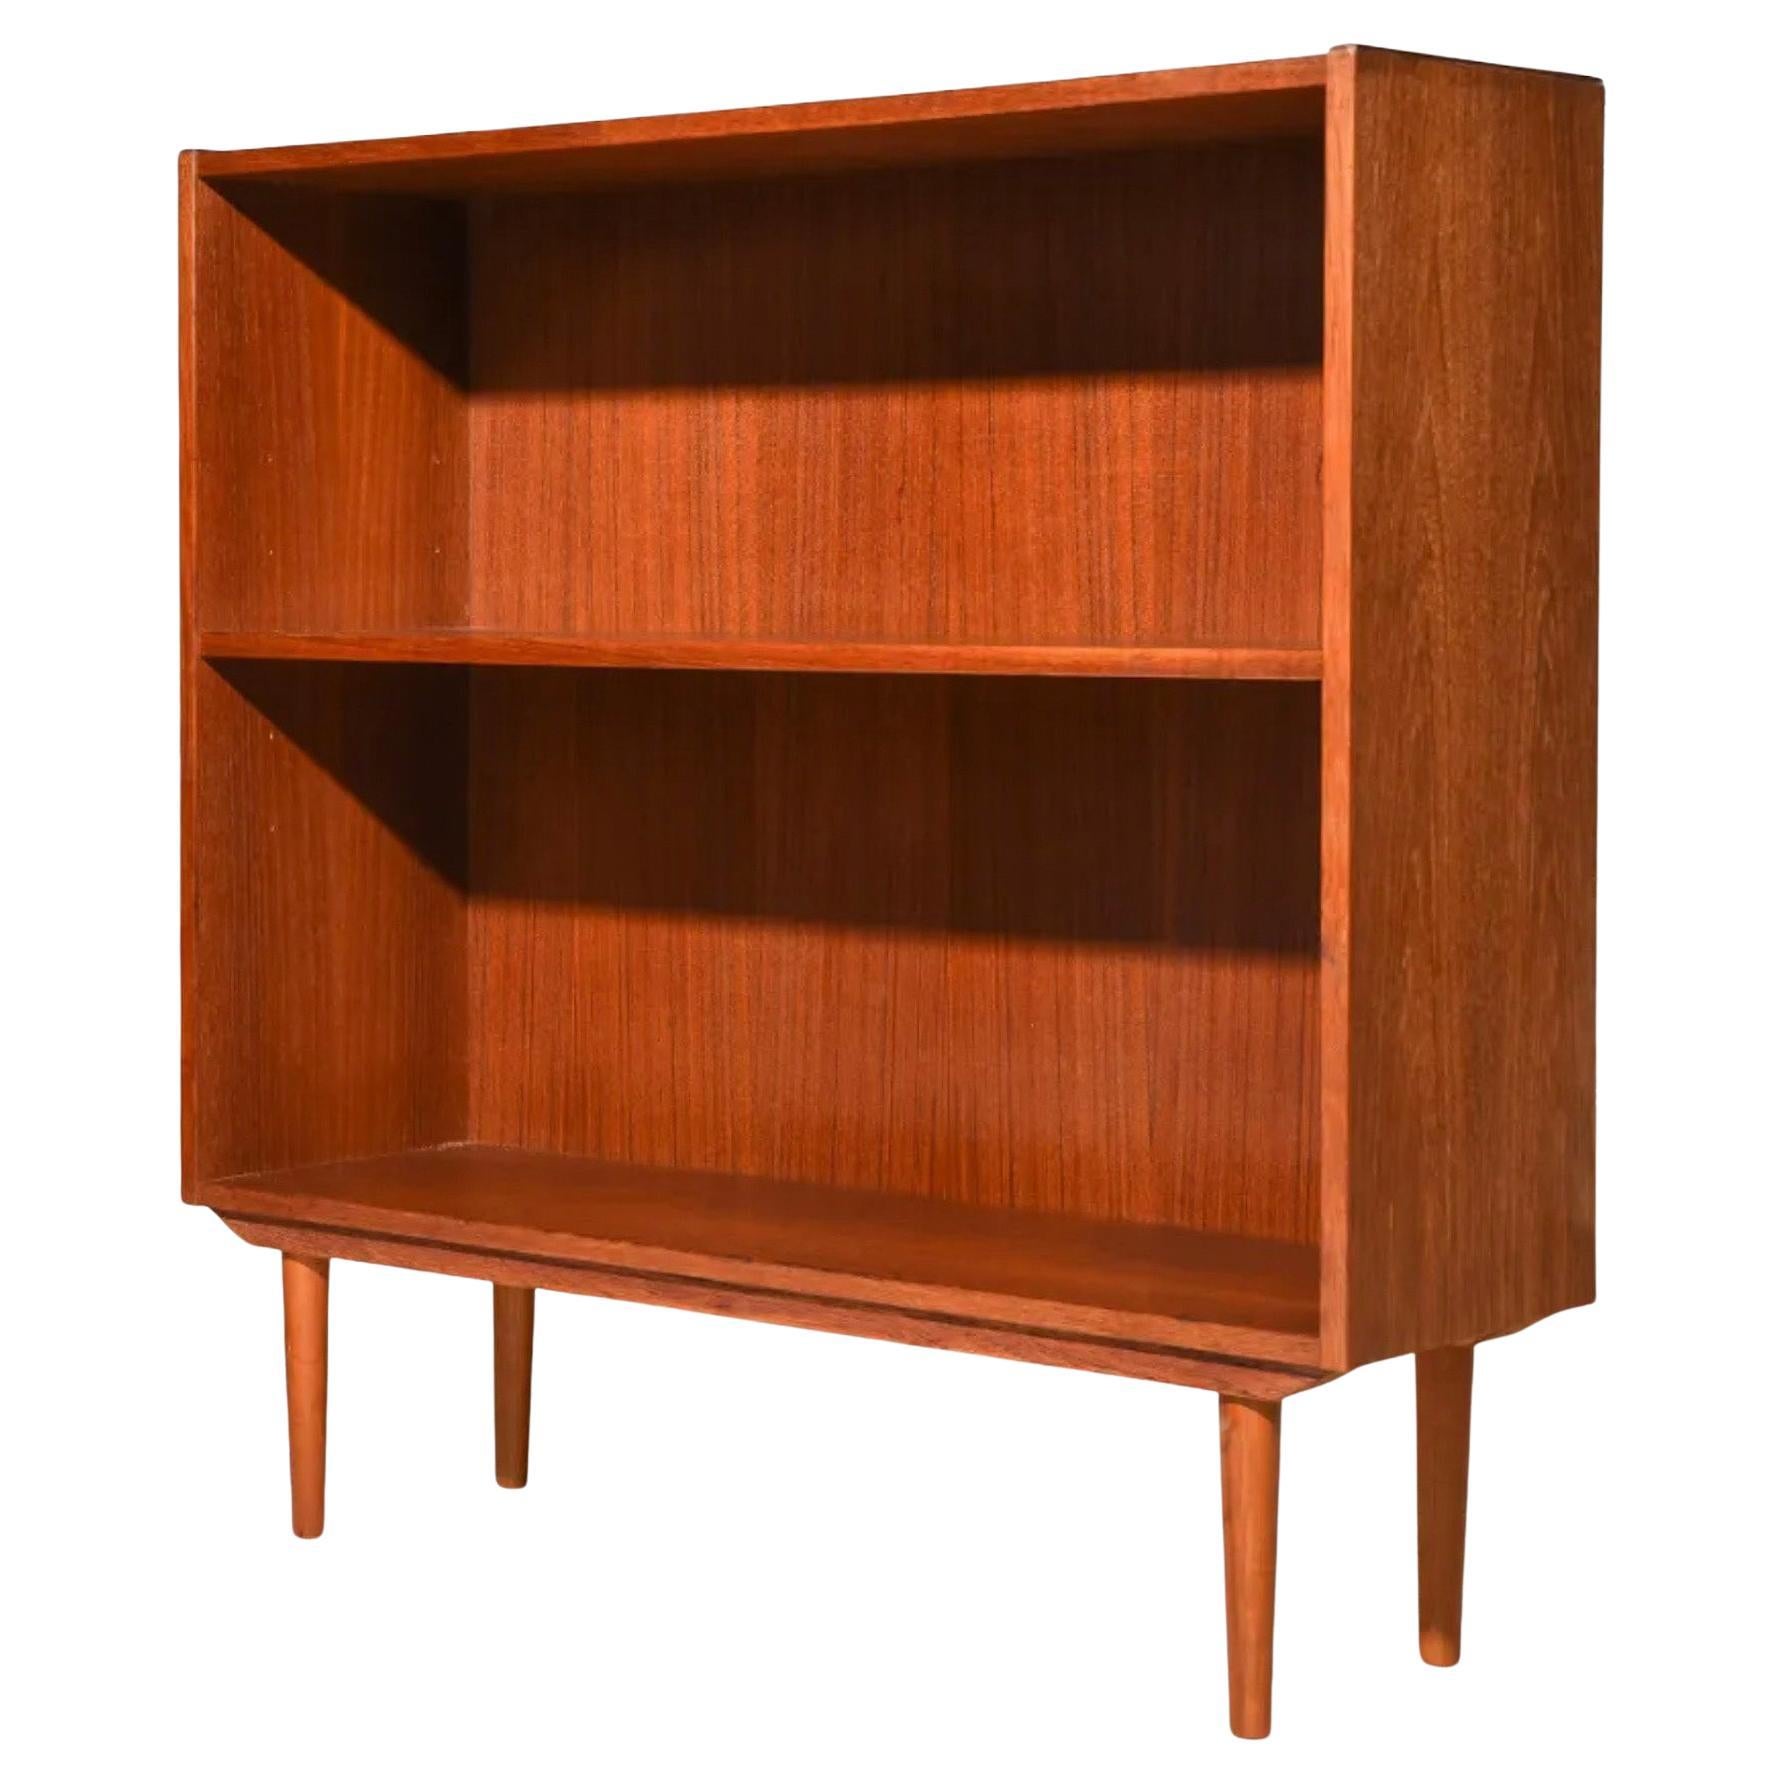 Pair of midcentury Danish modern teak bookcases. Each unit has 1 adjustable shelf in the middle. Nice reddish brown teak finish. Good vintage condition. Made in Denmark. Located in Brooklyn NYC.

Sold as a pair.

Each unit measures 34” W x 12” D